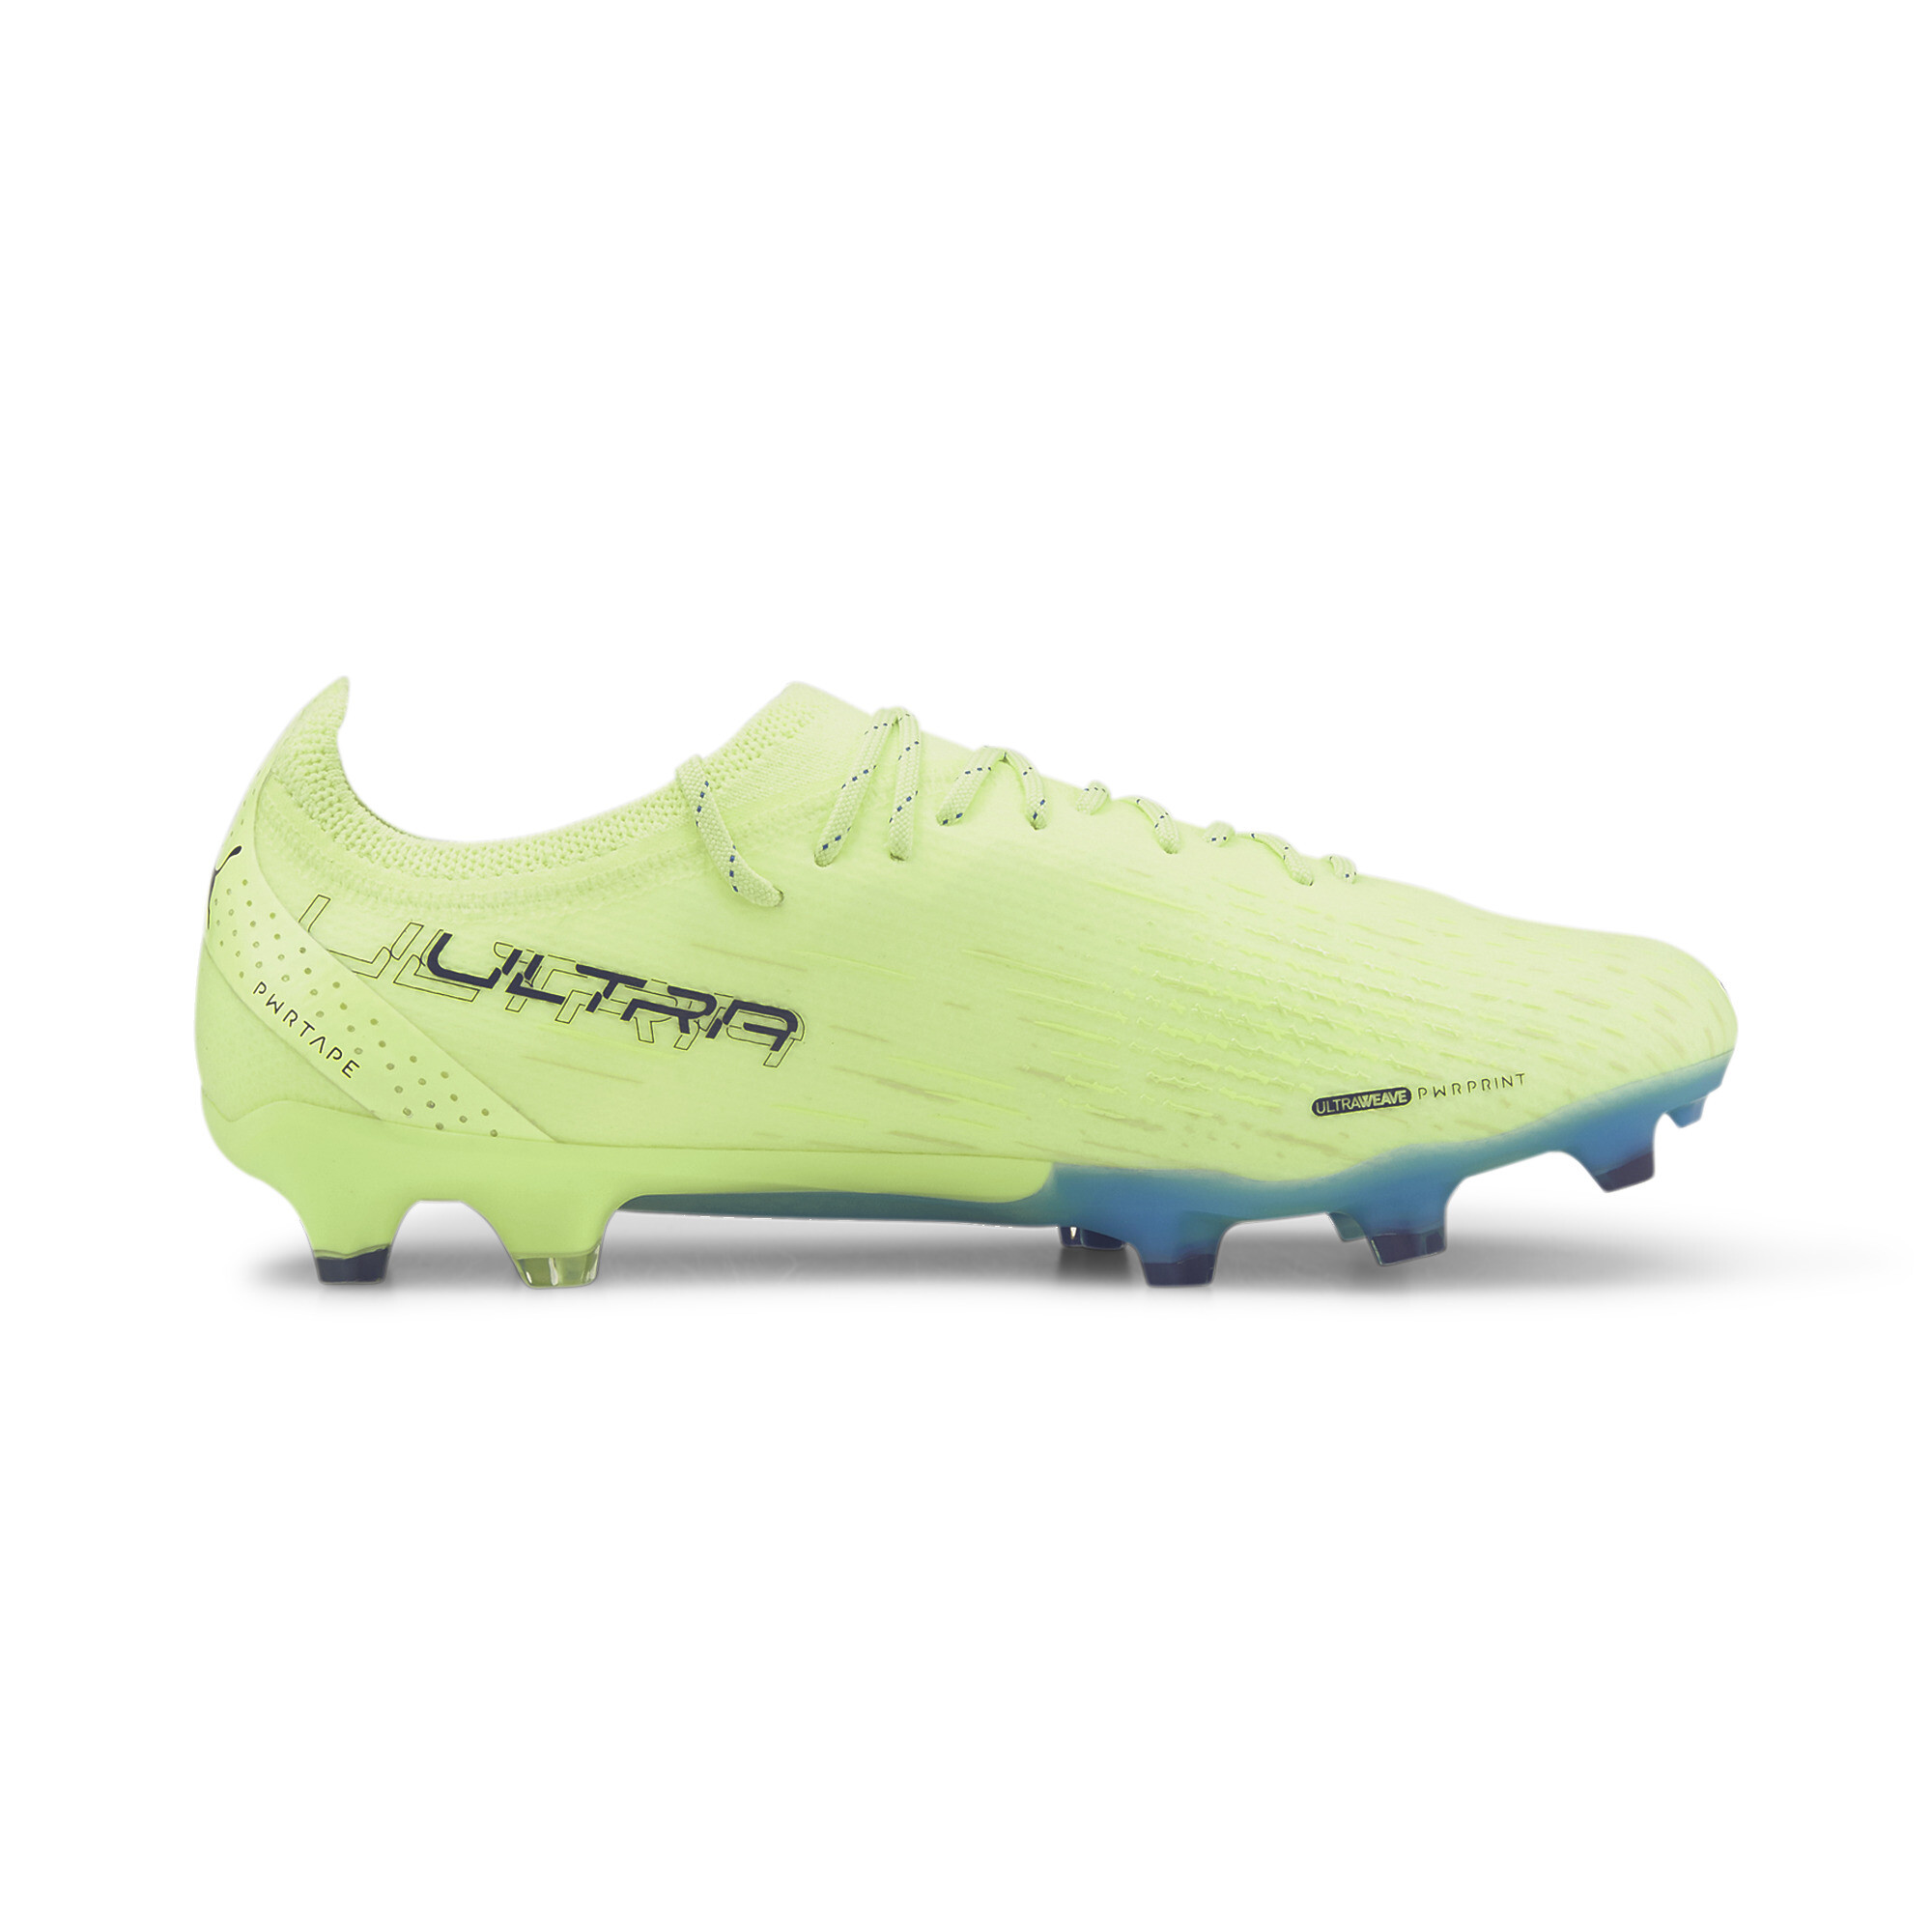 Men's PUMA ULTRA Ultimate FG/AG Football Boots In Yellow, Size EU 47